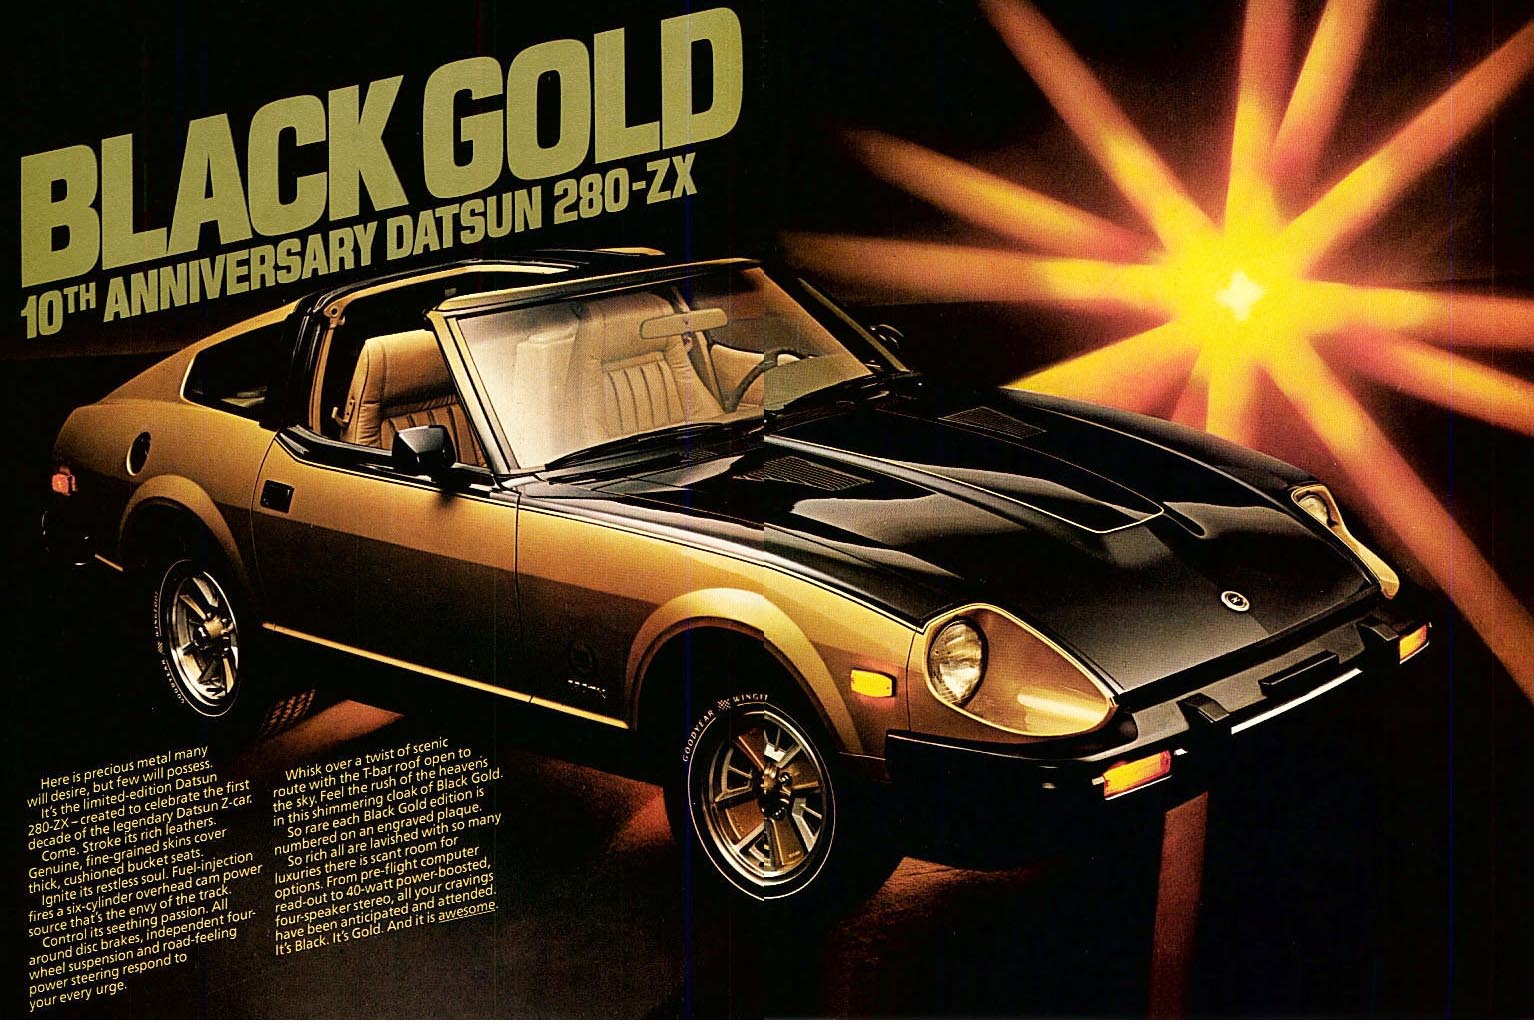 Yeesh. The famous black-and-gold 280ZX was everything that was wrong with Datsun in the 1980s. Yes, it's collectible, but it's also a complete refutation of the ideals of the original 240Z. It is flashy, it has T-tops, and it's about as sporty as a handlebar moustache.